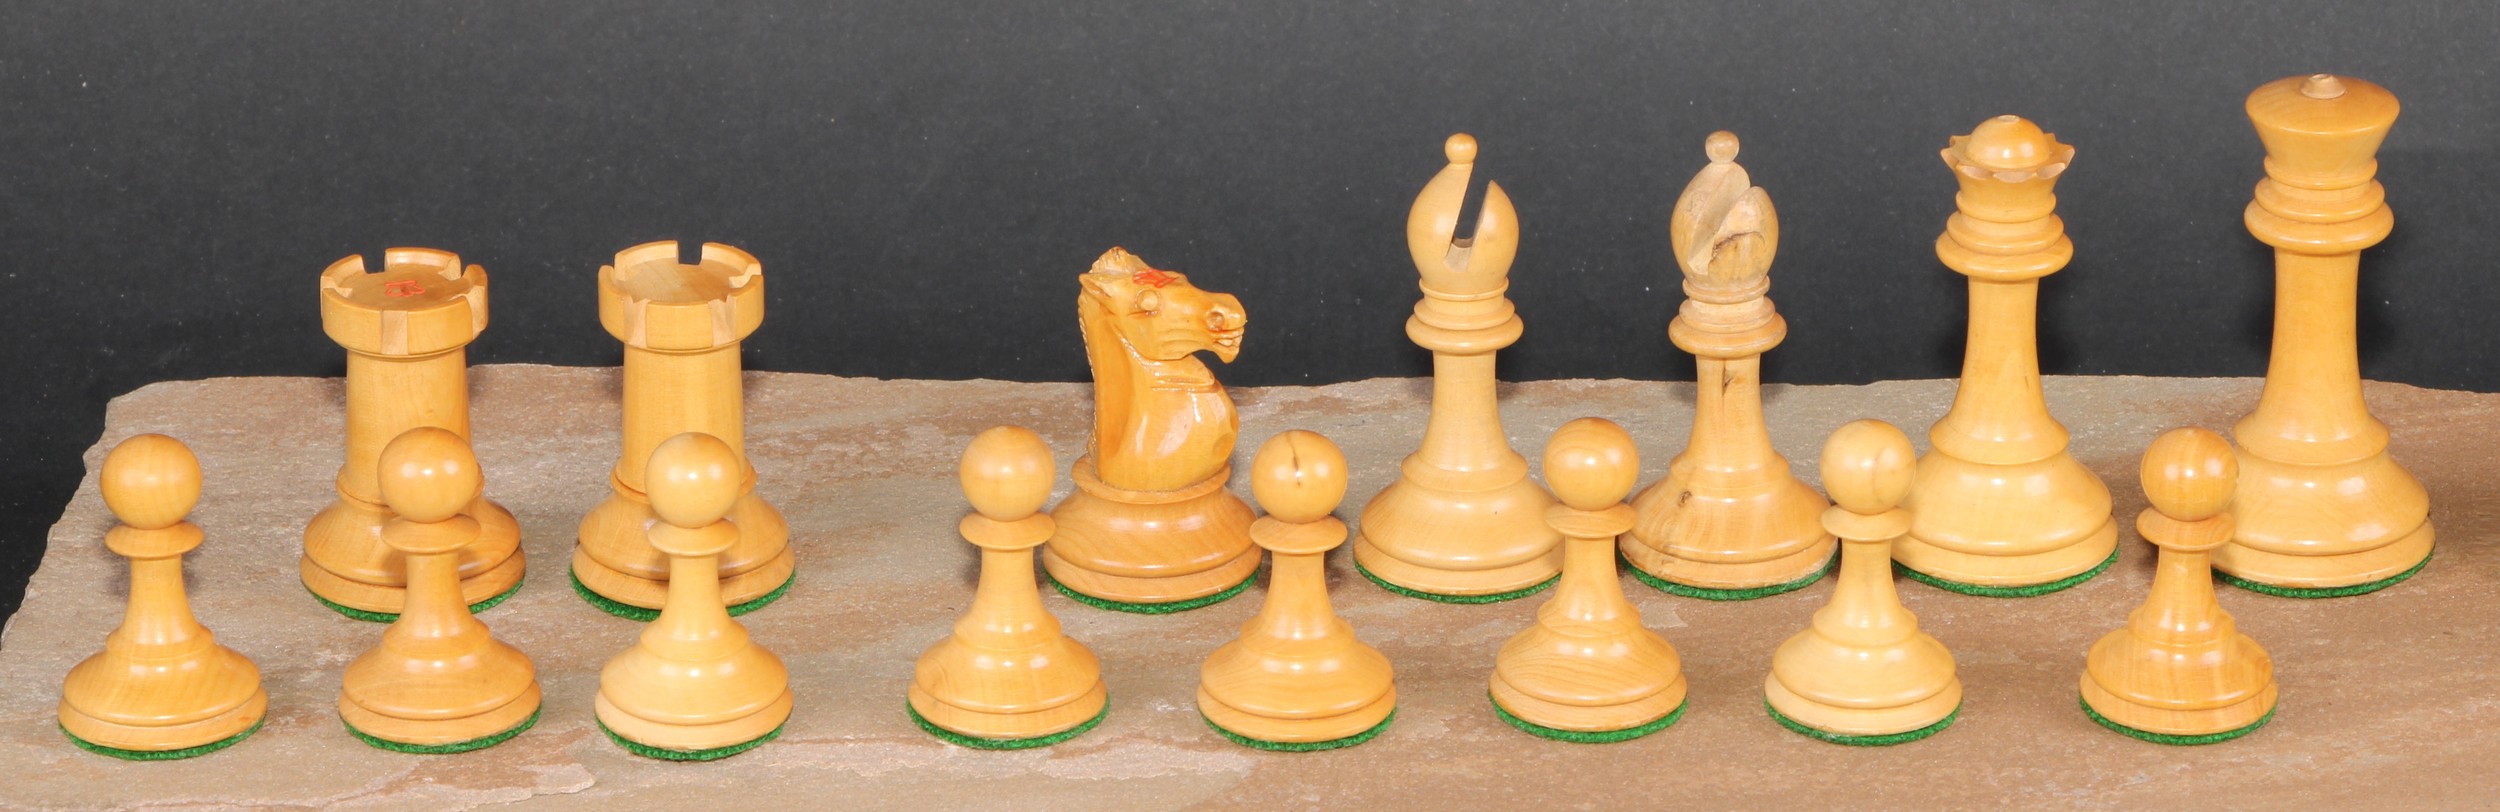 A boxwood and ebonised Staunton chess set, marked for King’s side, the Kings 7cm high, mahogany box - Image 3 of 4